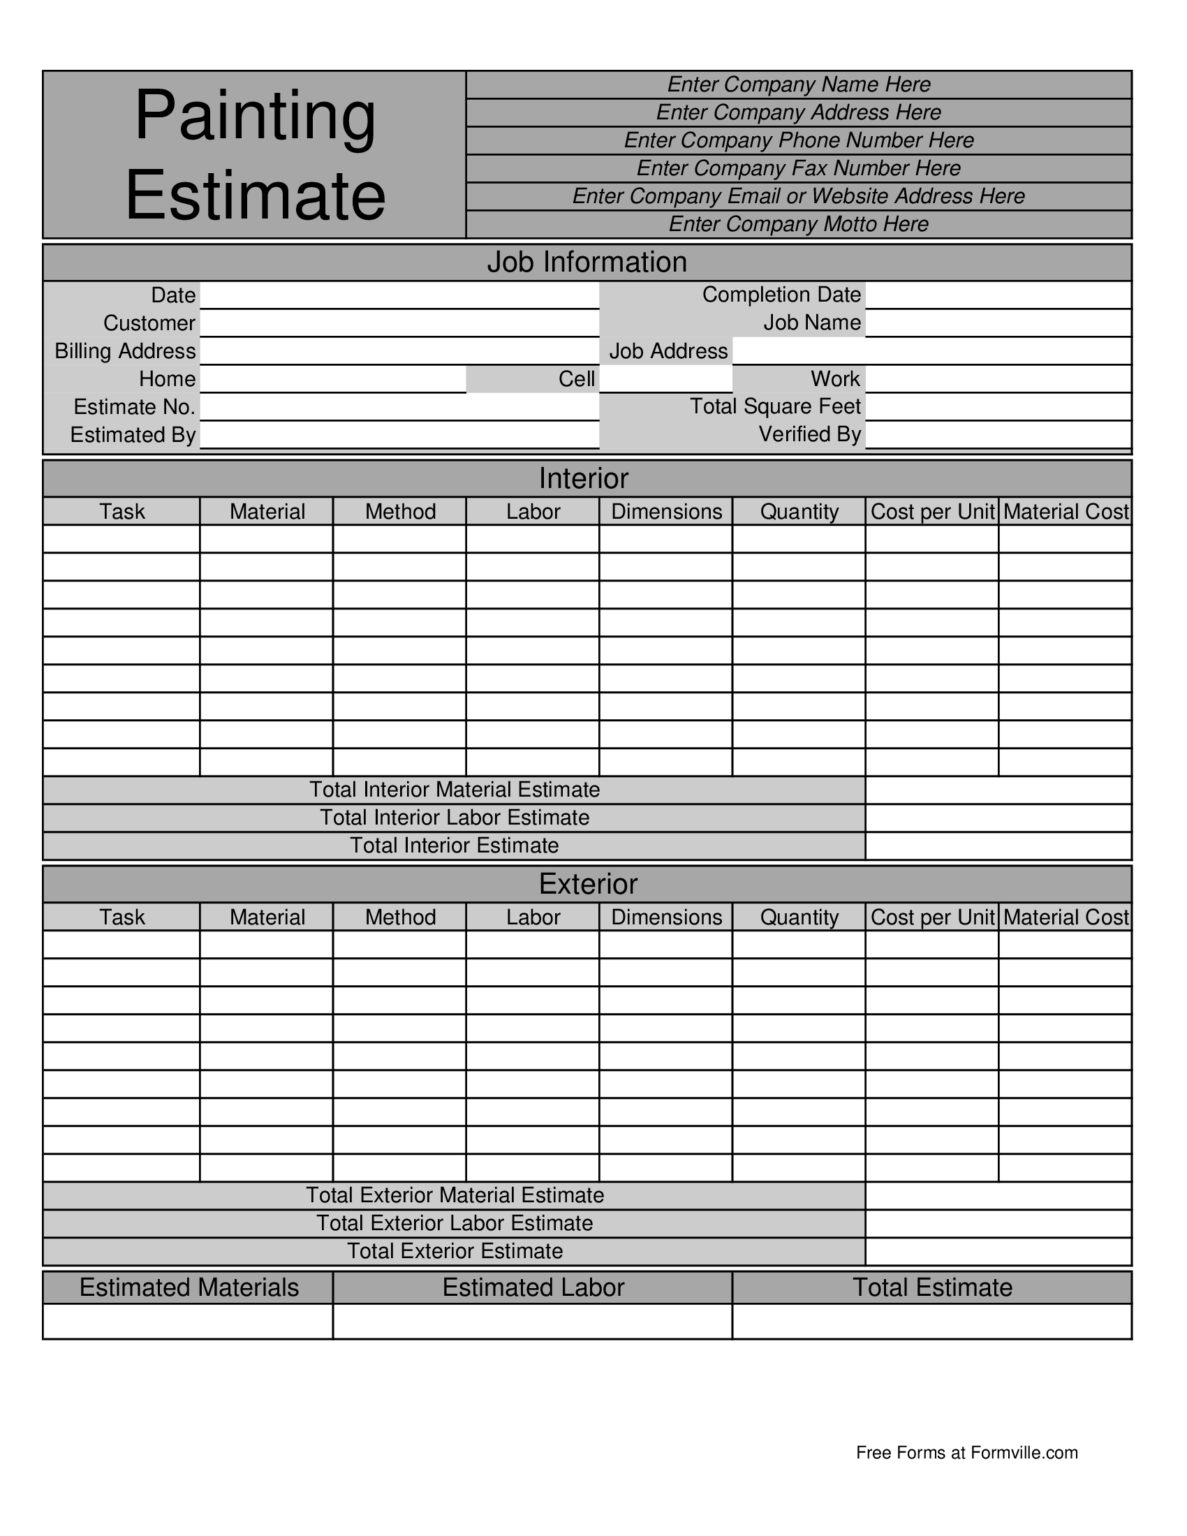 Download Painting Estimate Template 1 1187x1536 